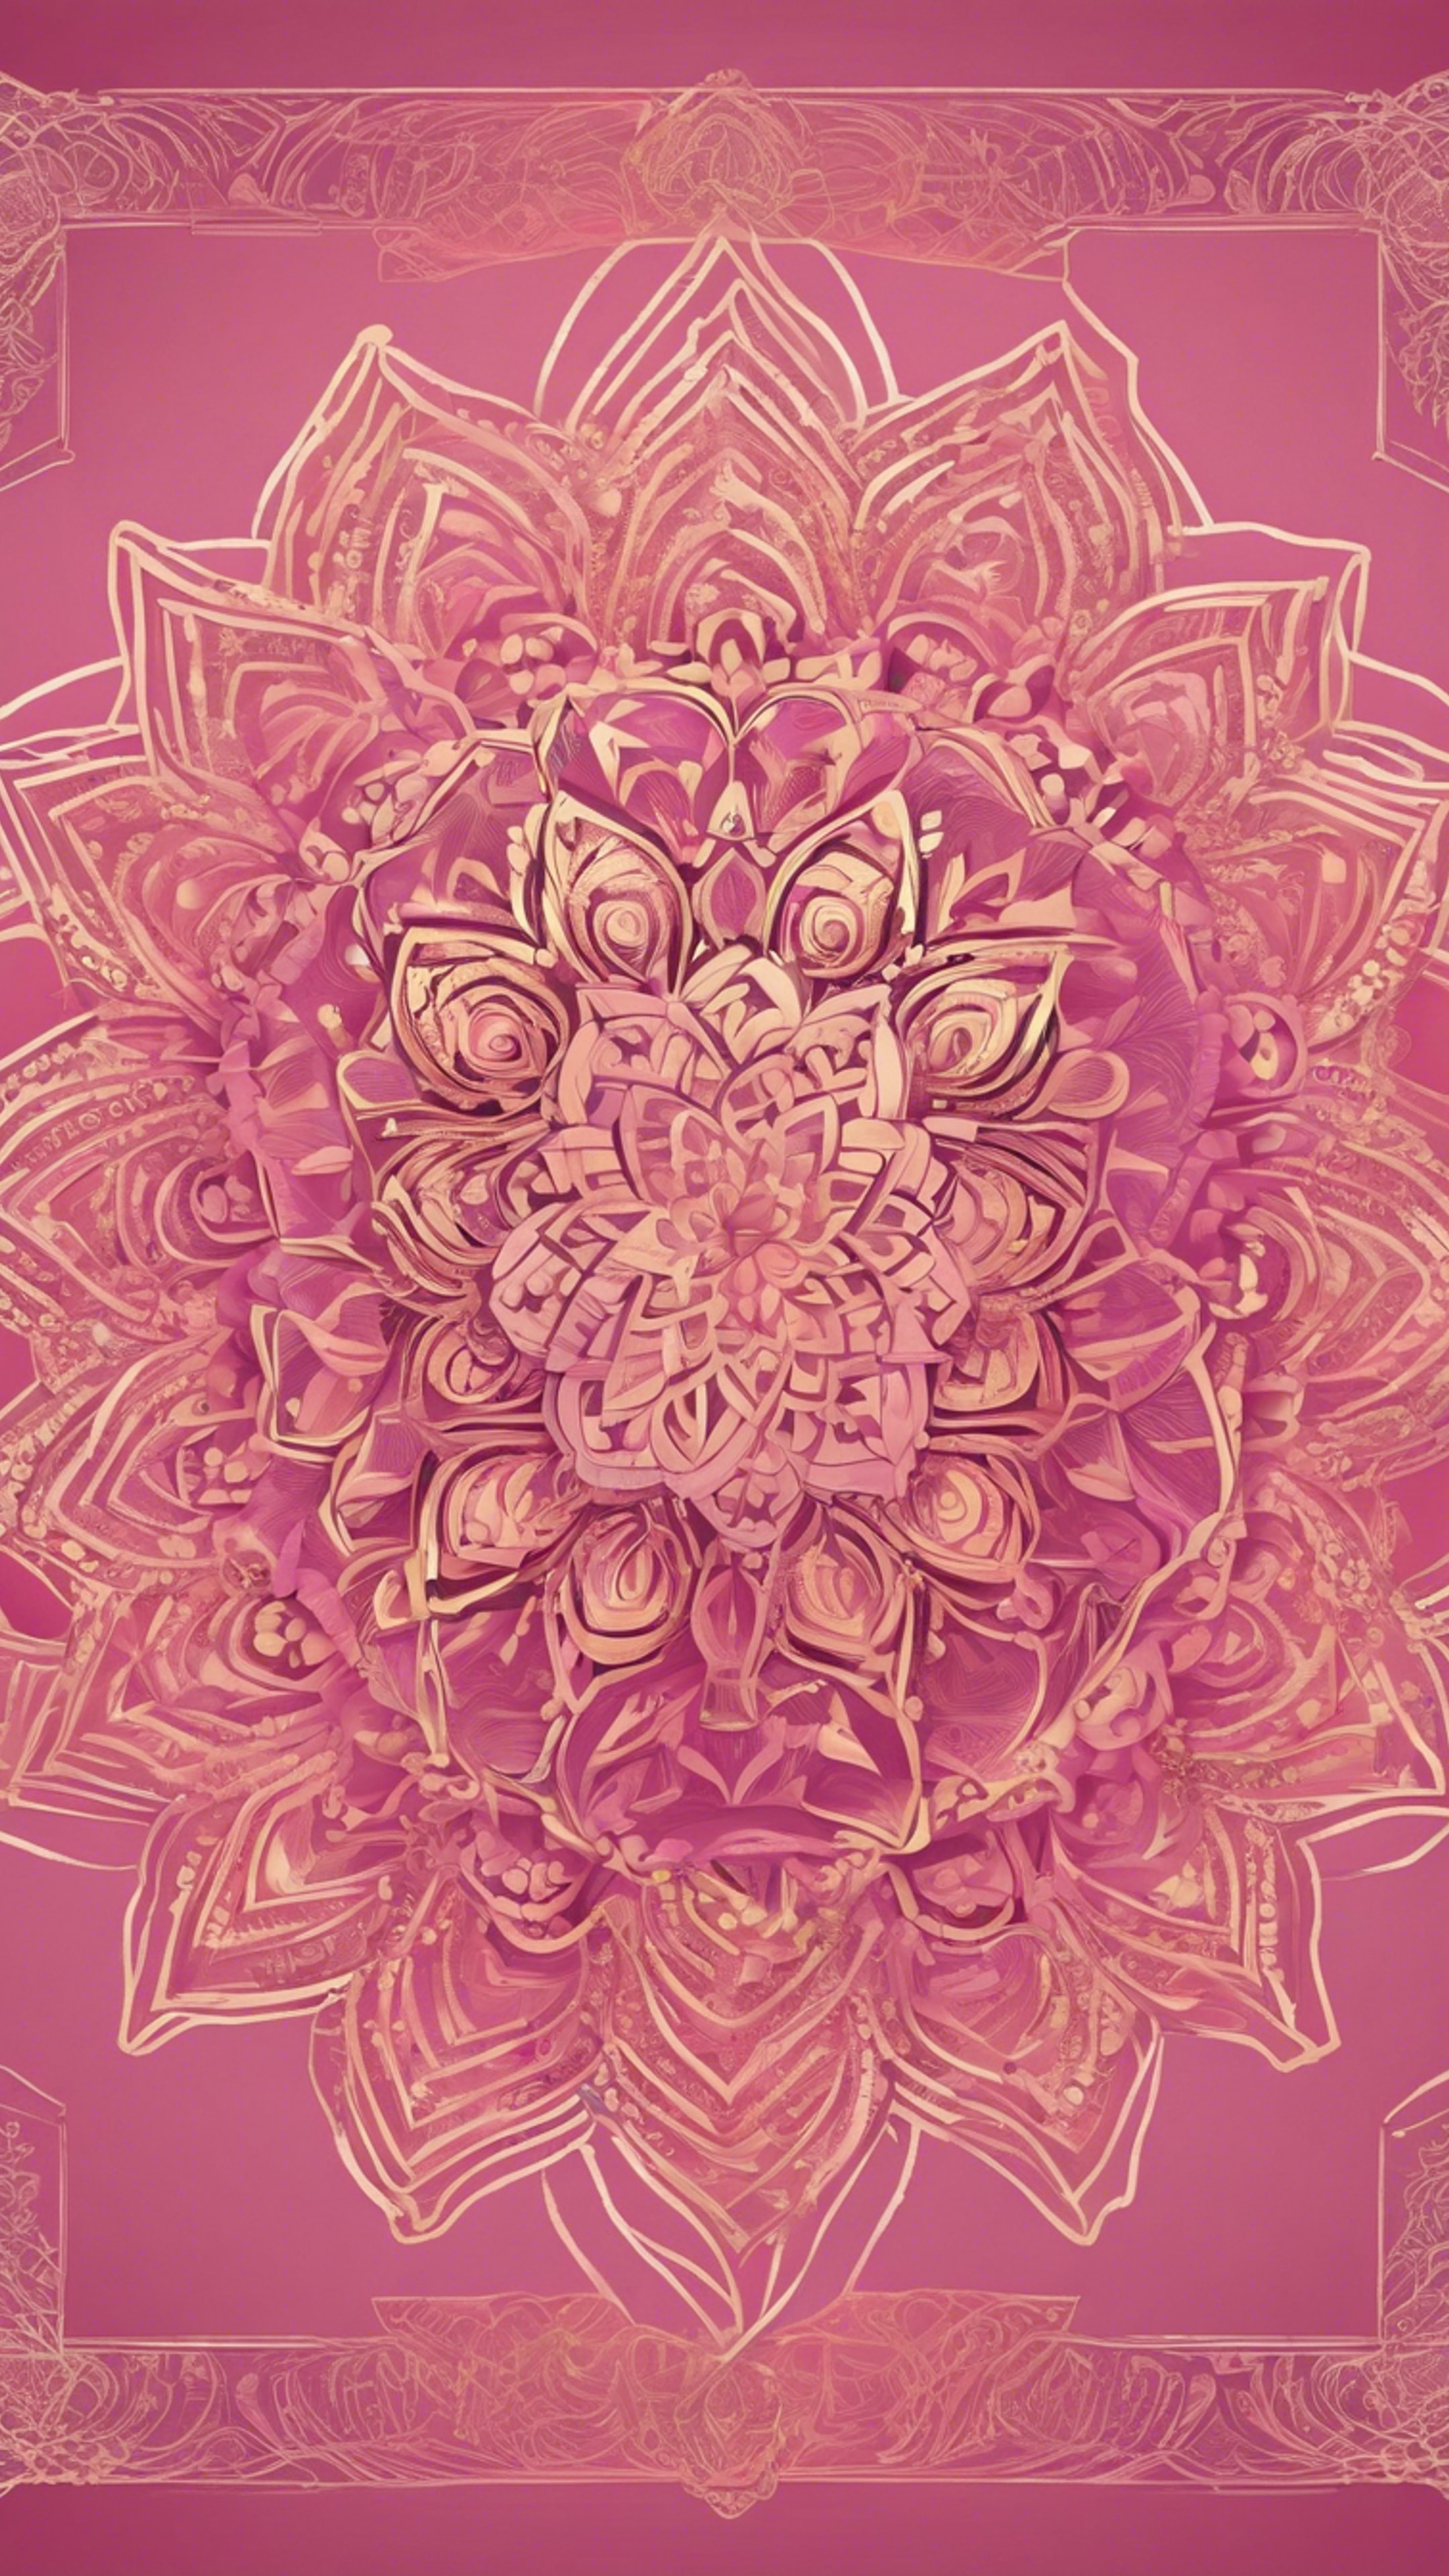 A pink and gold mandala design flourishing with intricate line art and vibrant colors. ورق الجدران[7f3fcd6ed997428c89d3]